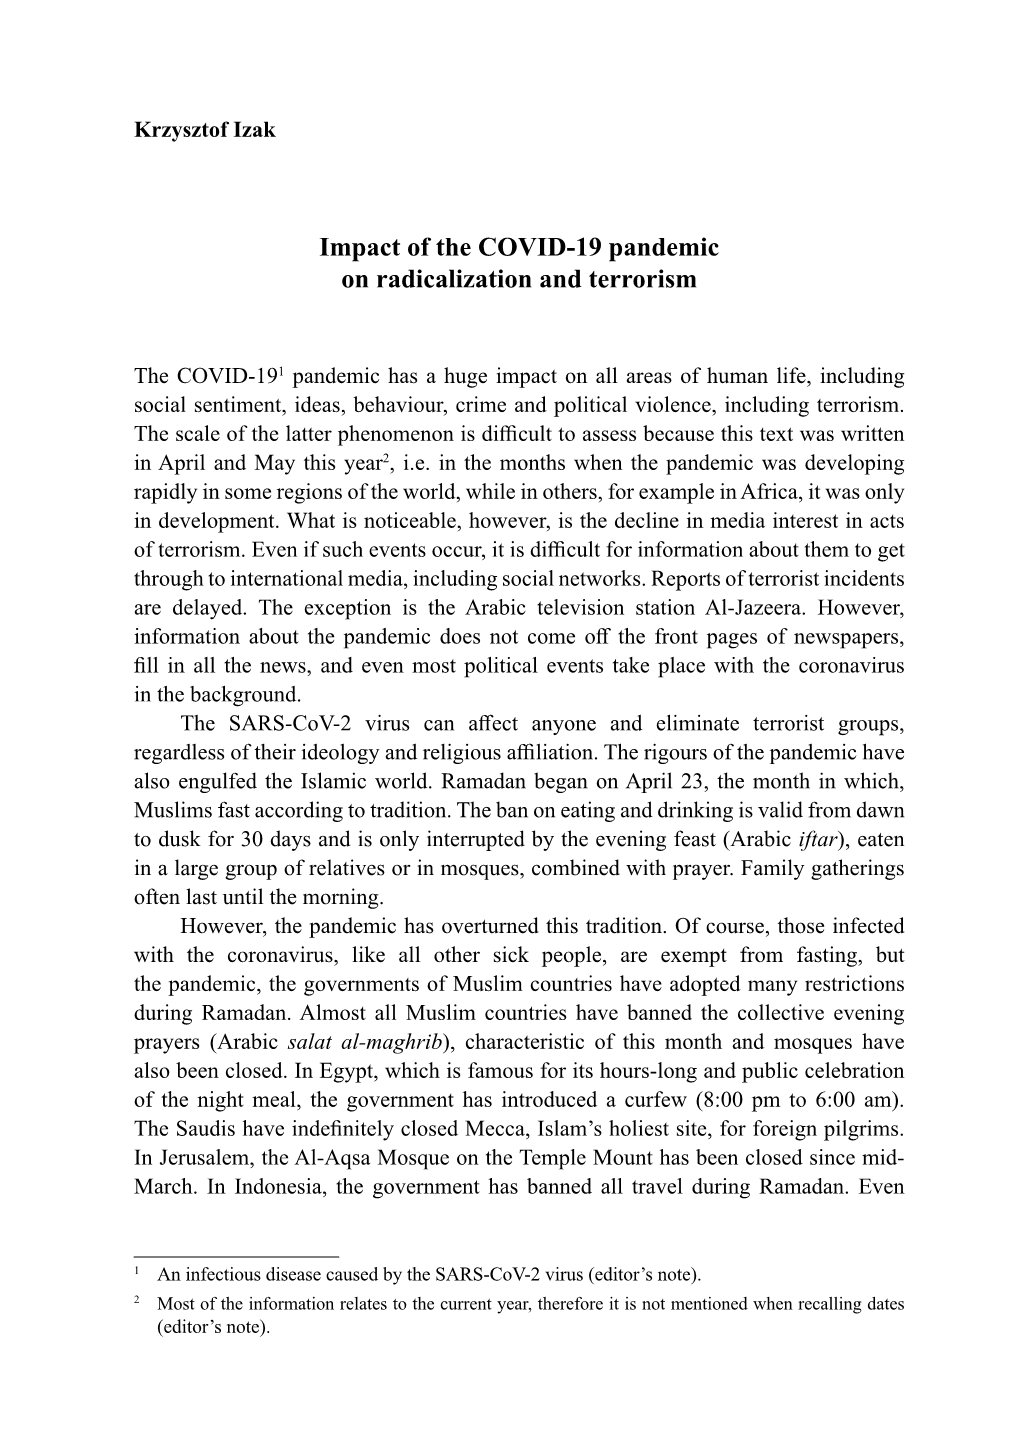 Impact of the COVID-19 Pandemic on Radicalization and Terrorism